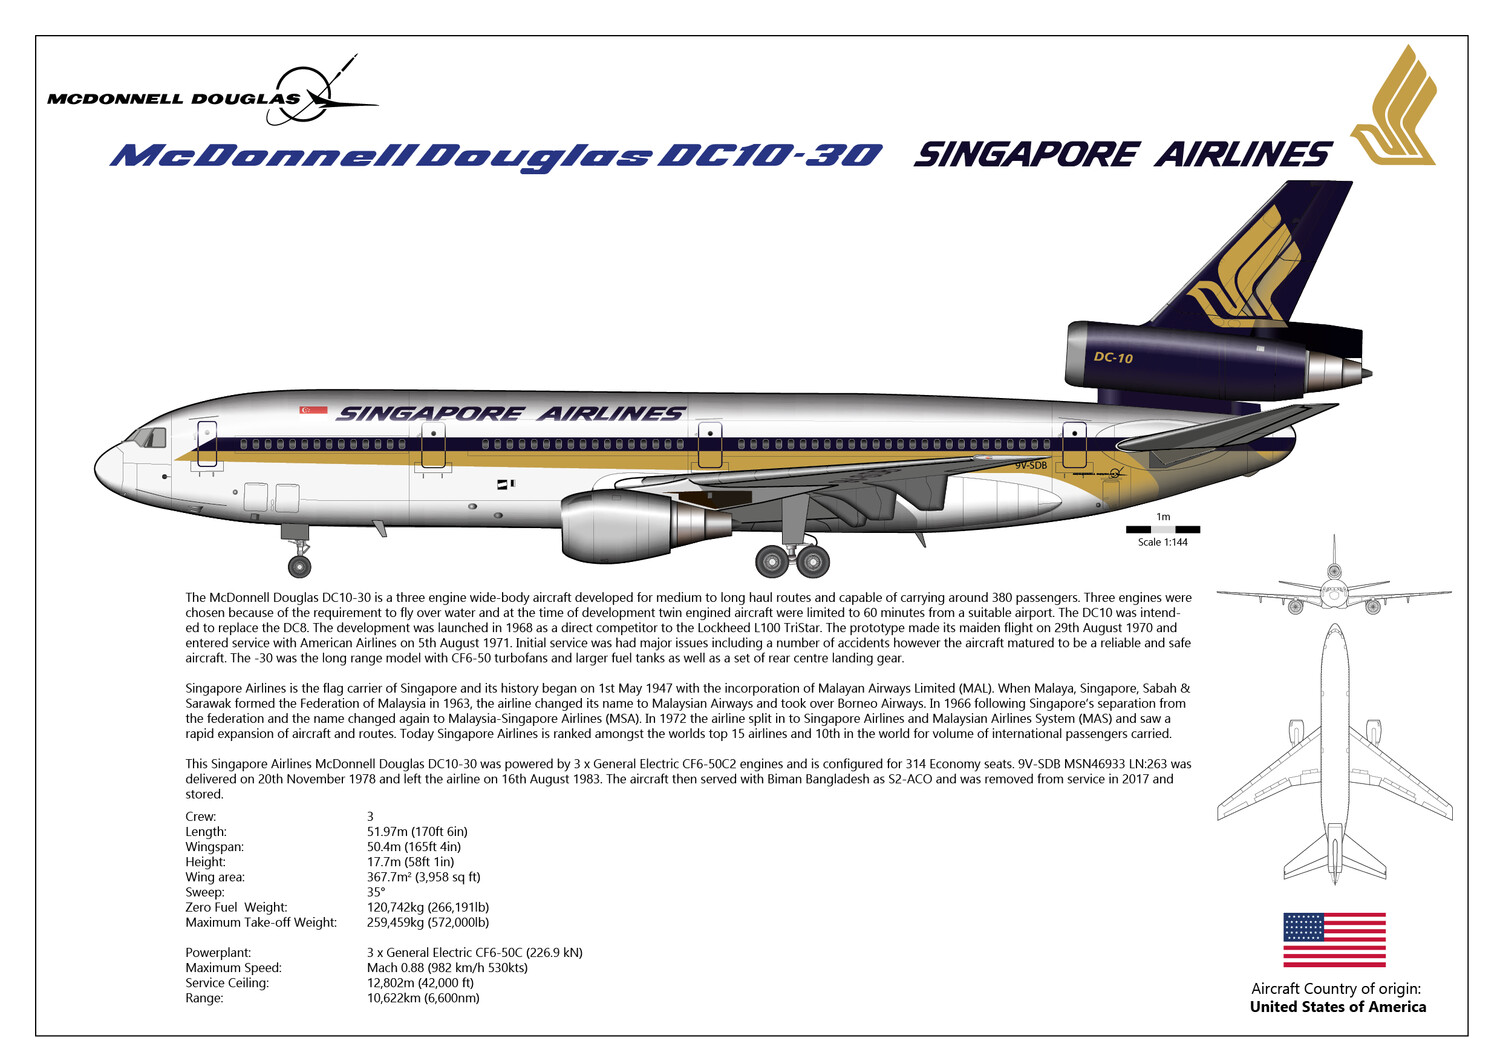 DC10-30 of Singapore Airlines - Layout B